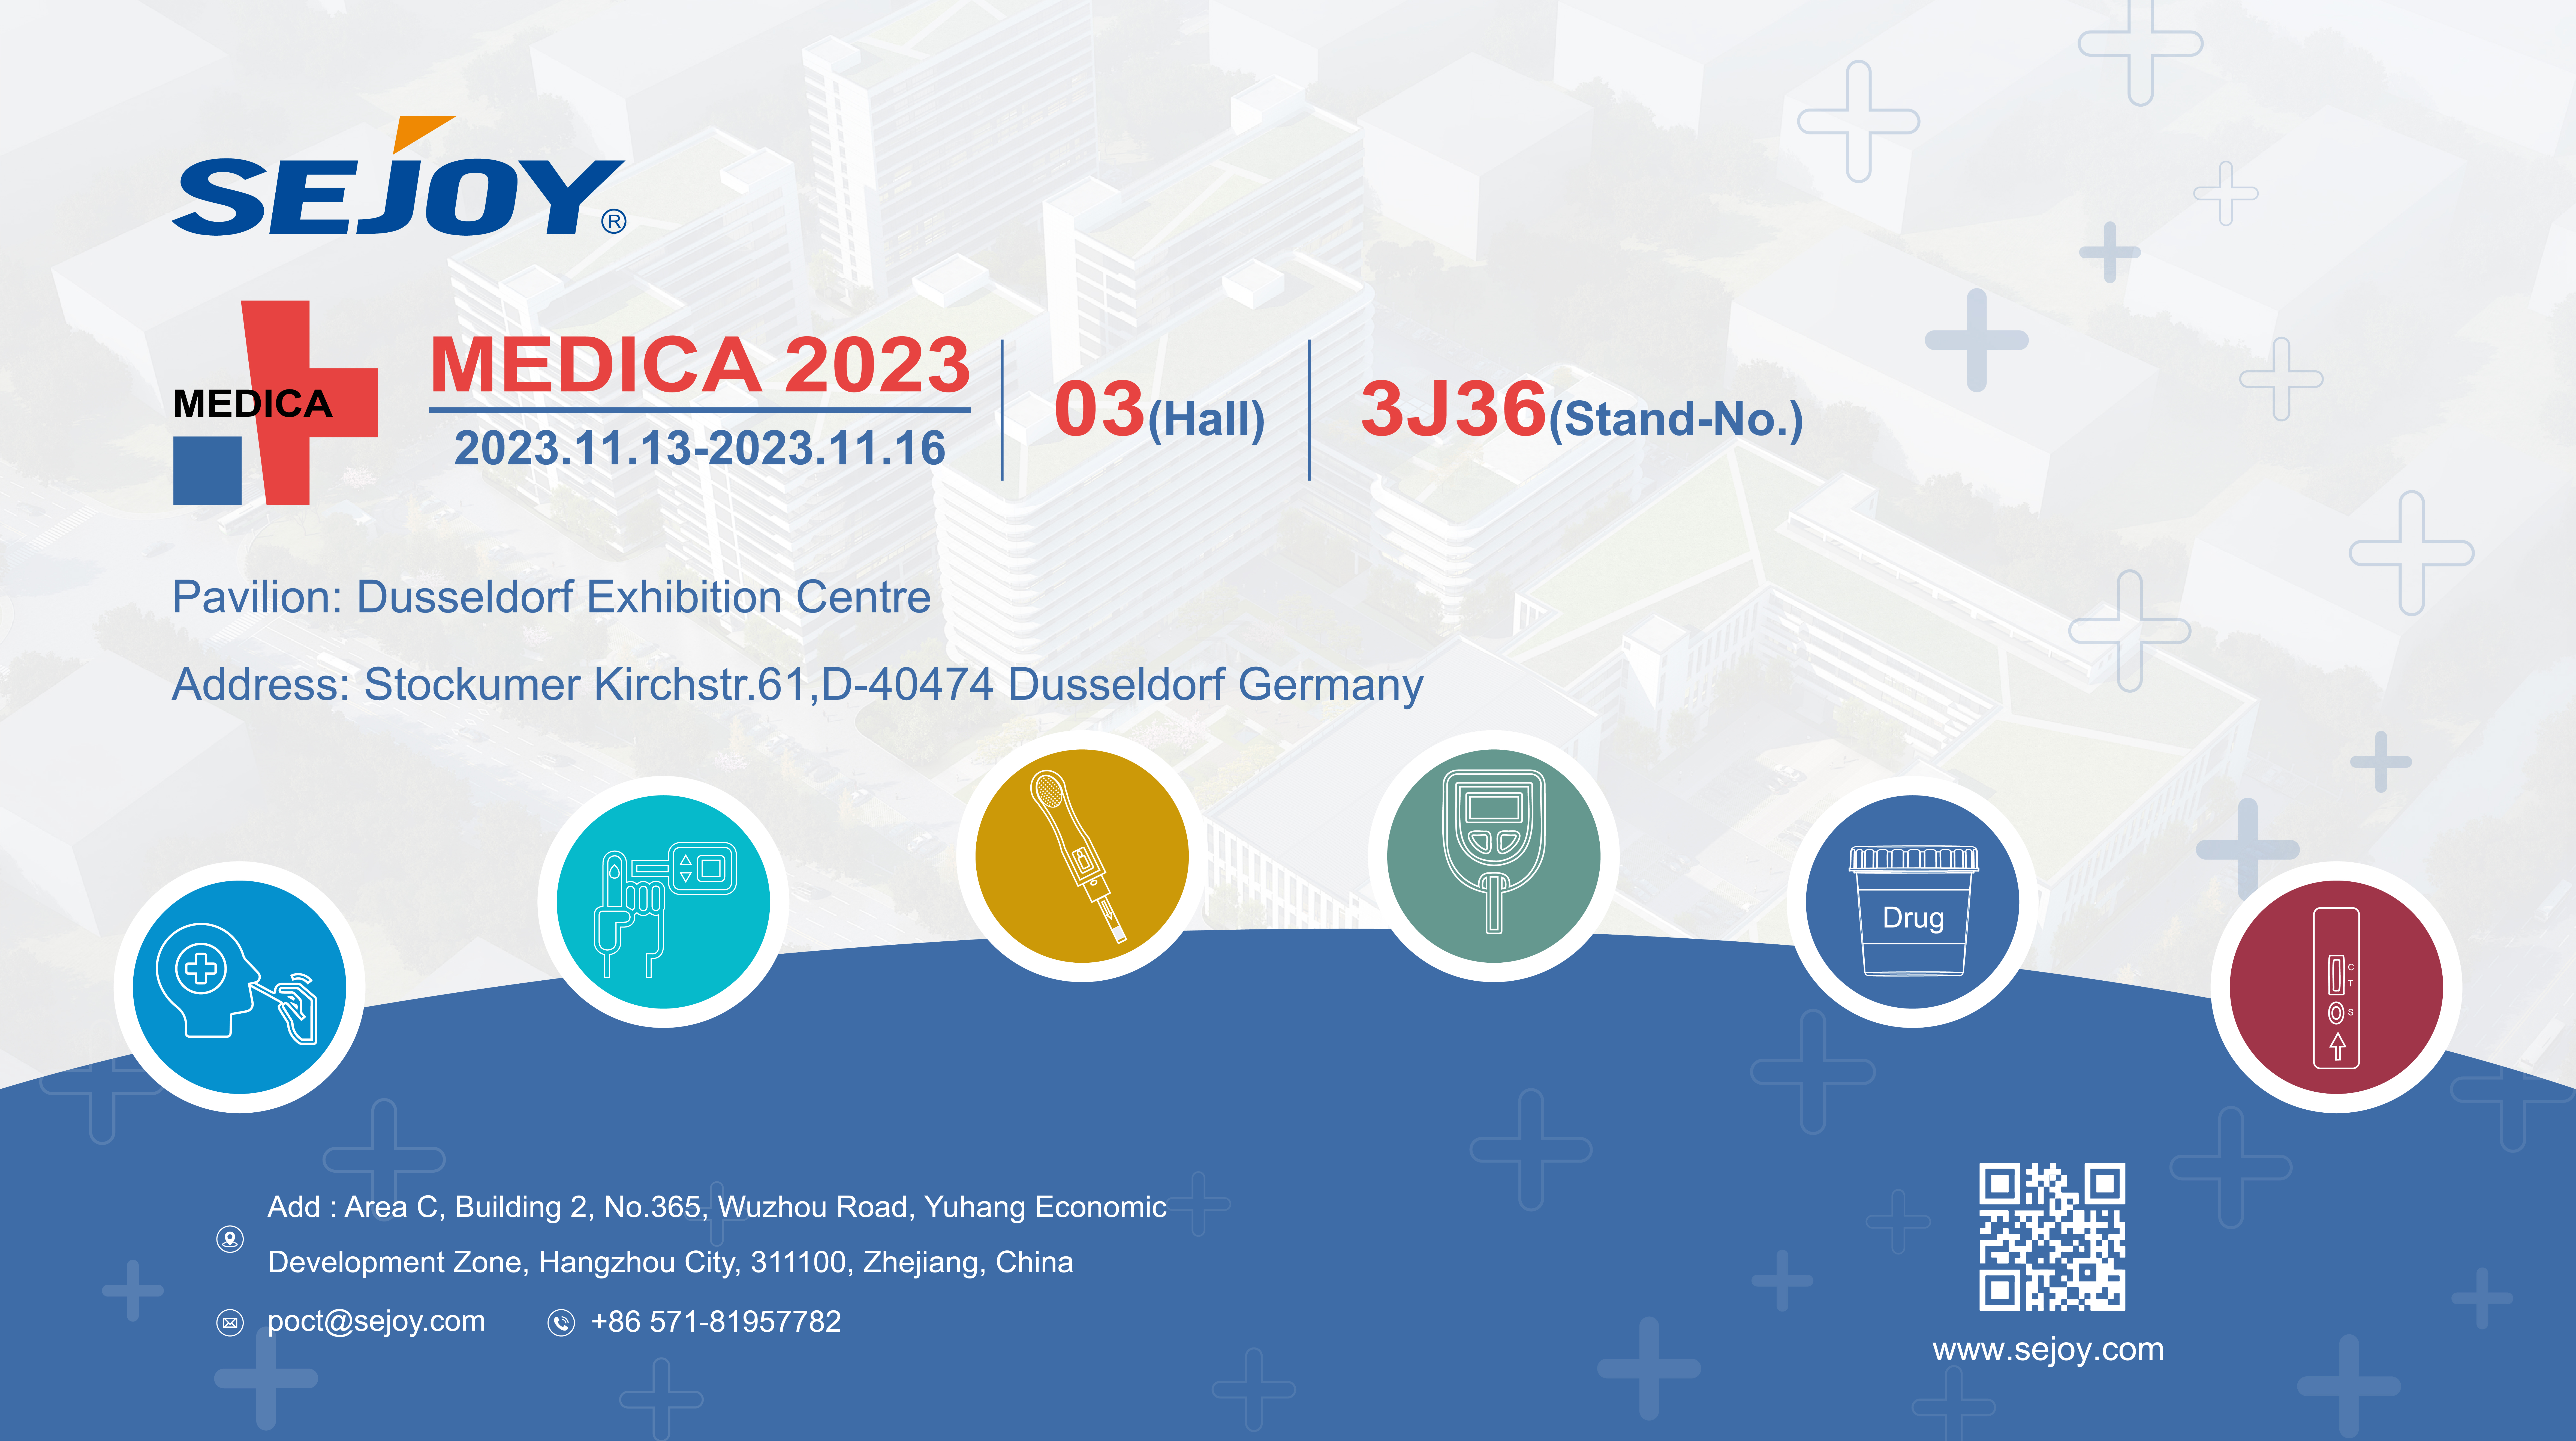 Medica 2023│sejoy invites you to join us in Germany